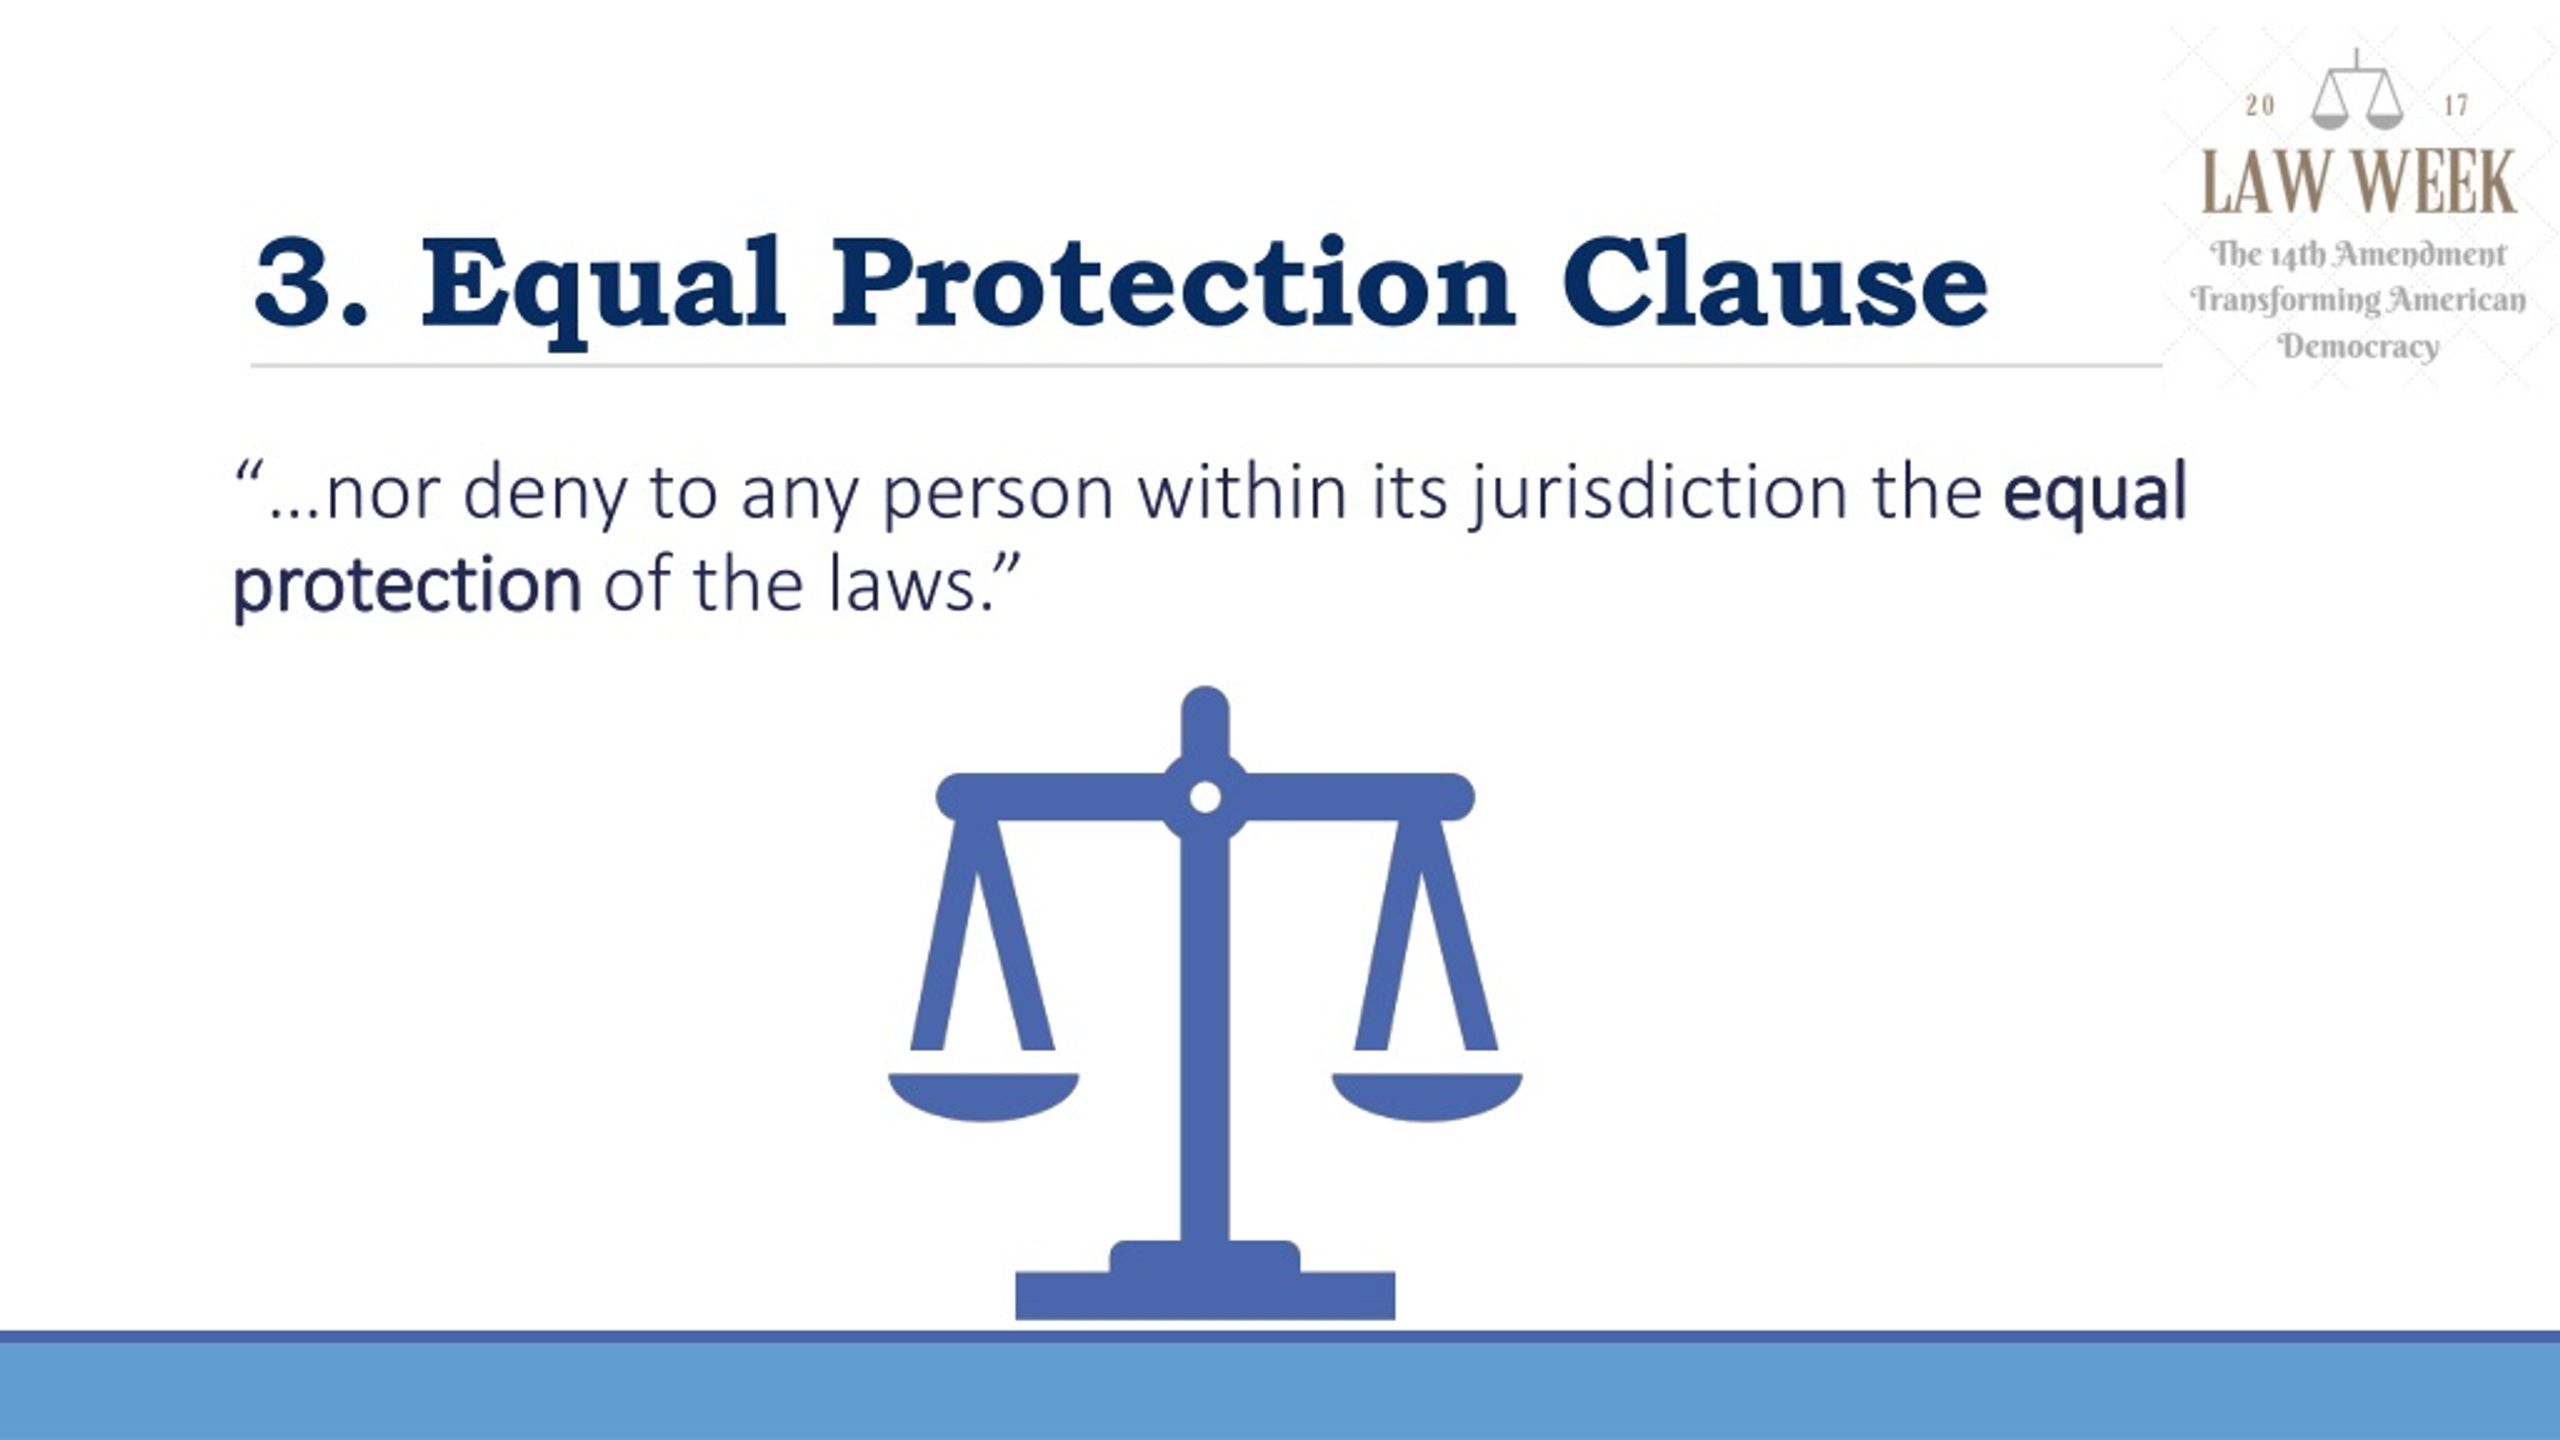 equal protection clause definition